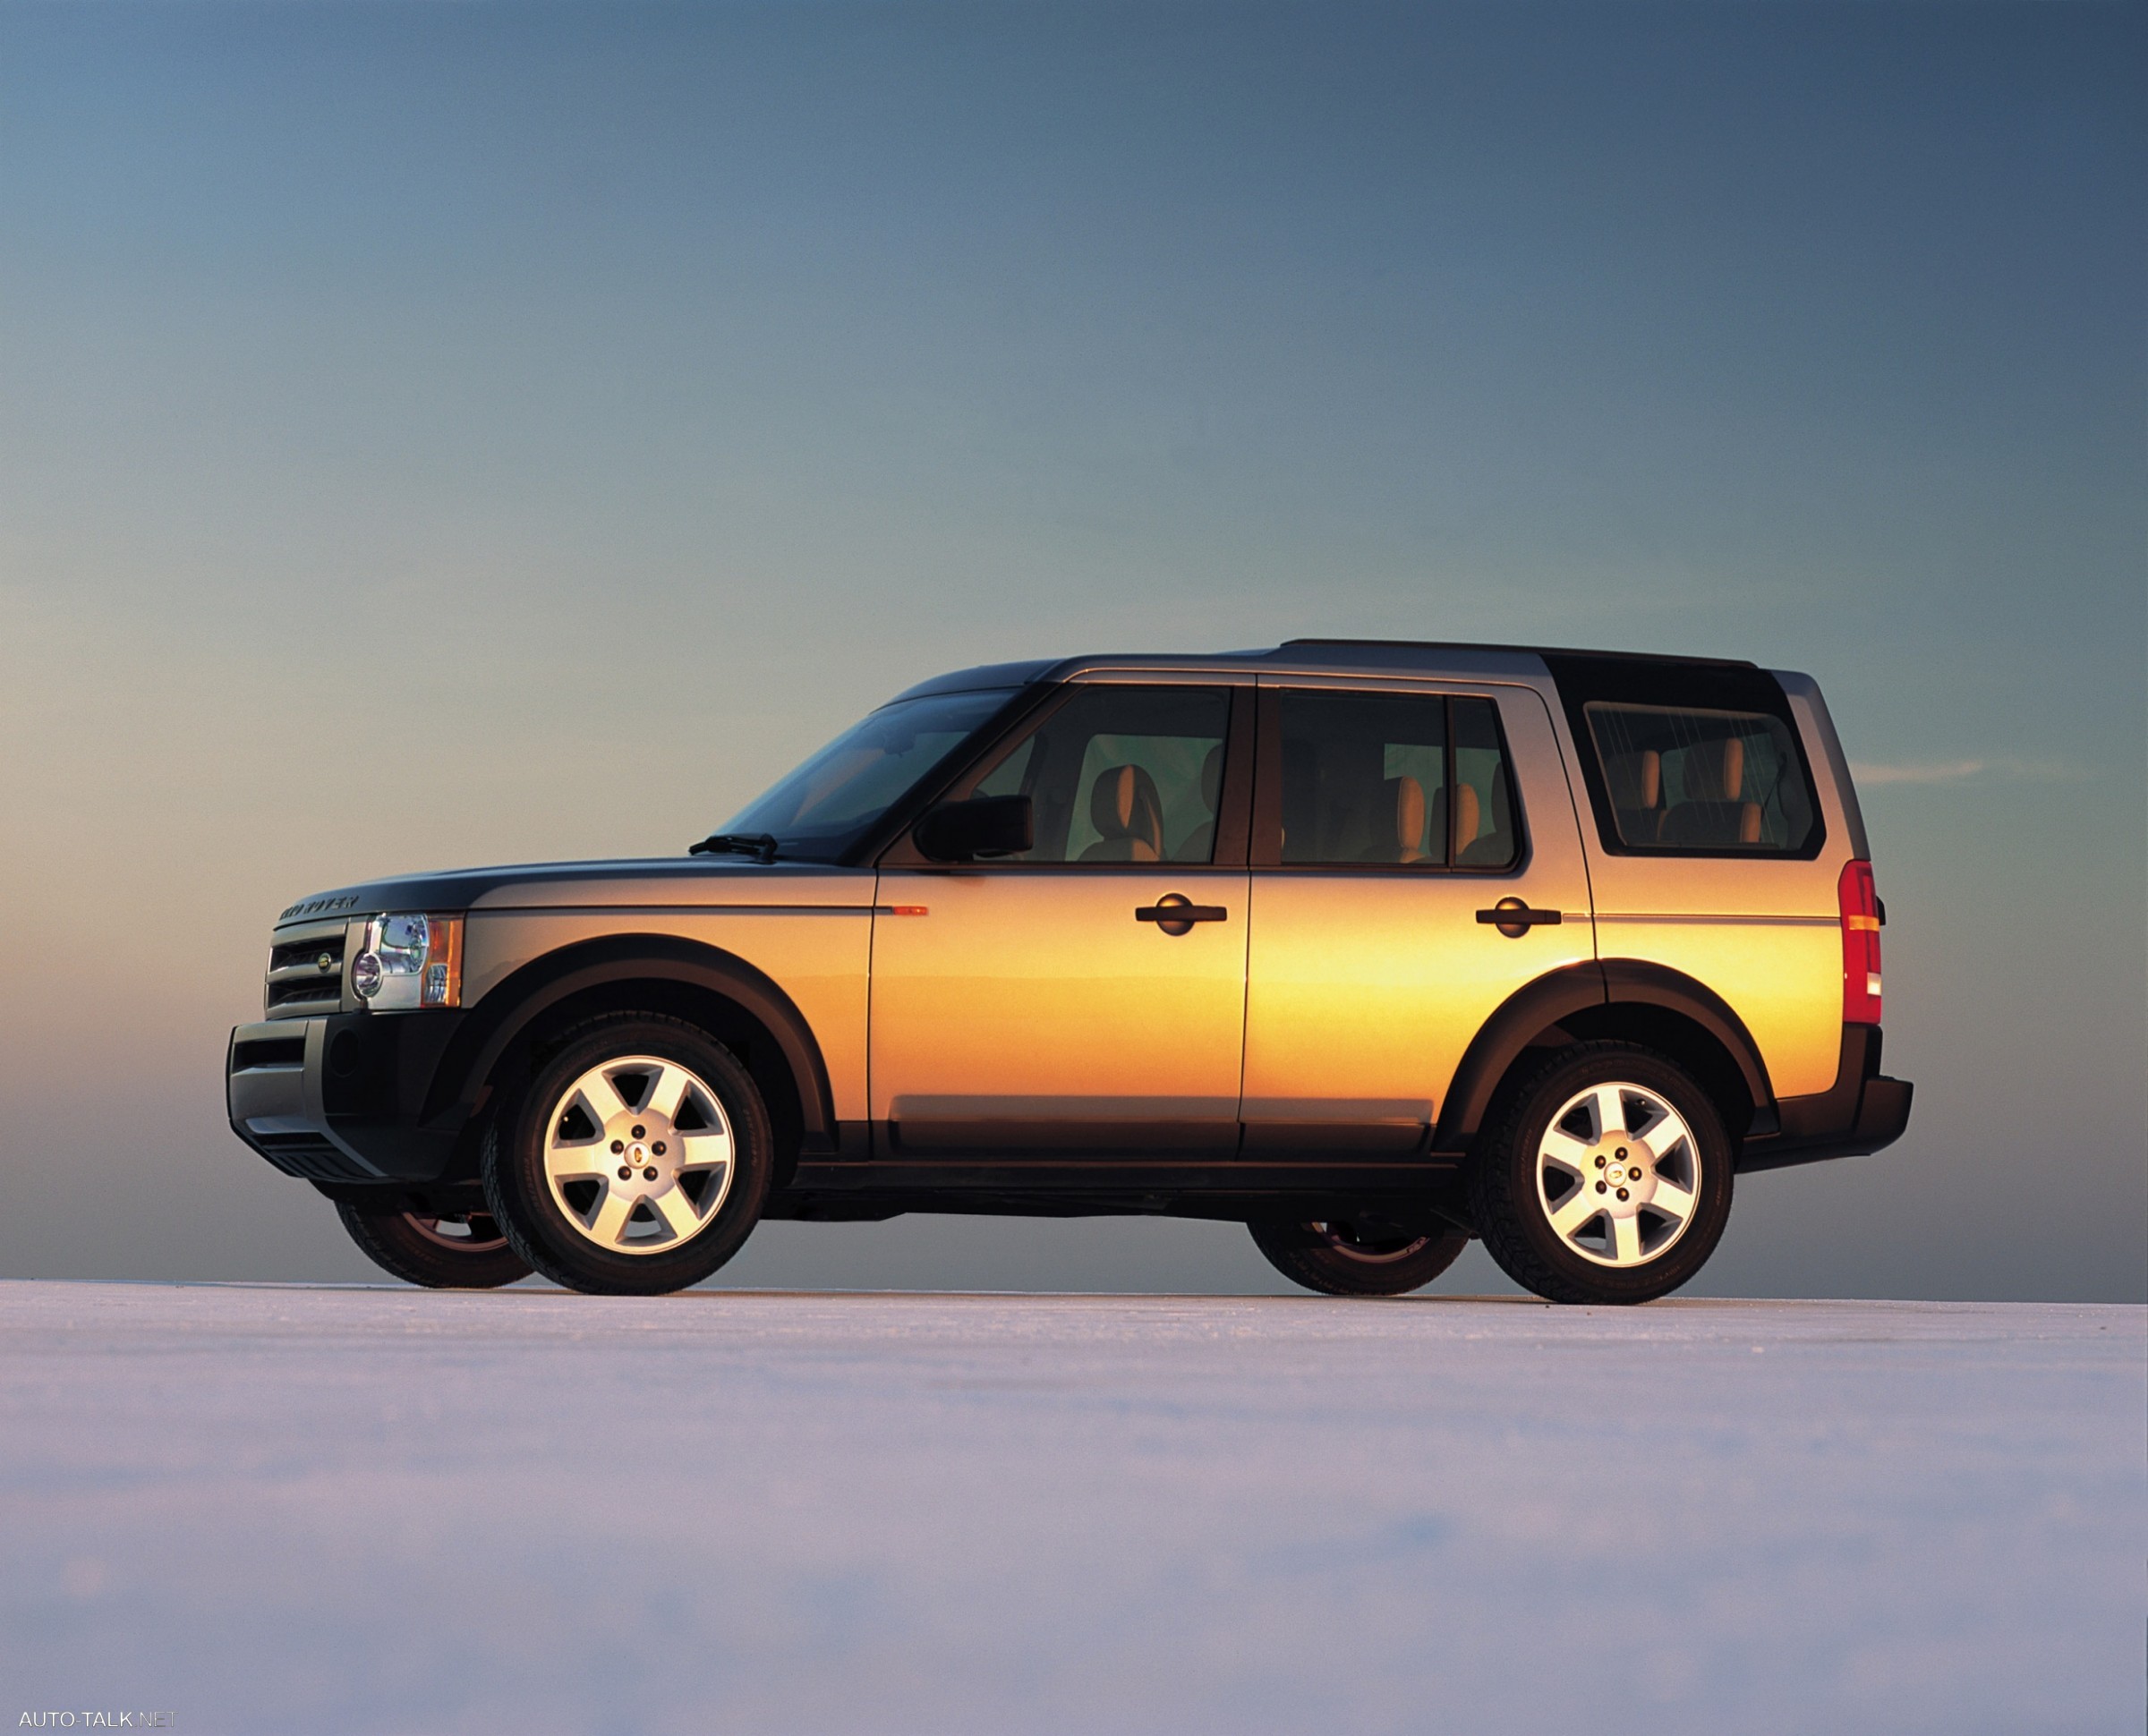 Ленд ровер дискавери характеристики. Ленд Ровер Дискавери 3 2005. Land Rover Discovery 3 2005. Land Rover lr3/Discovery 3. Ленд Ровер Дискавери 3 2008.